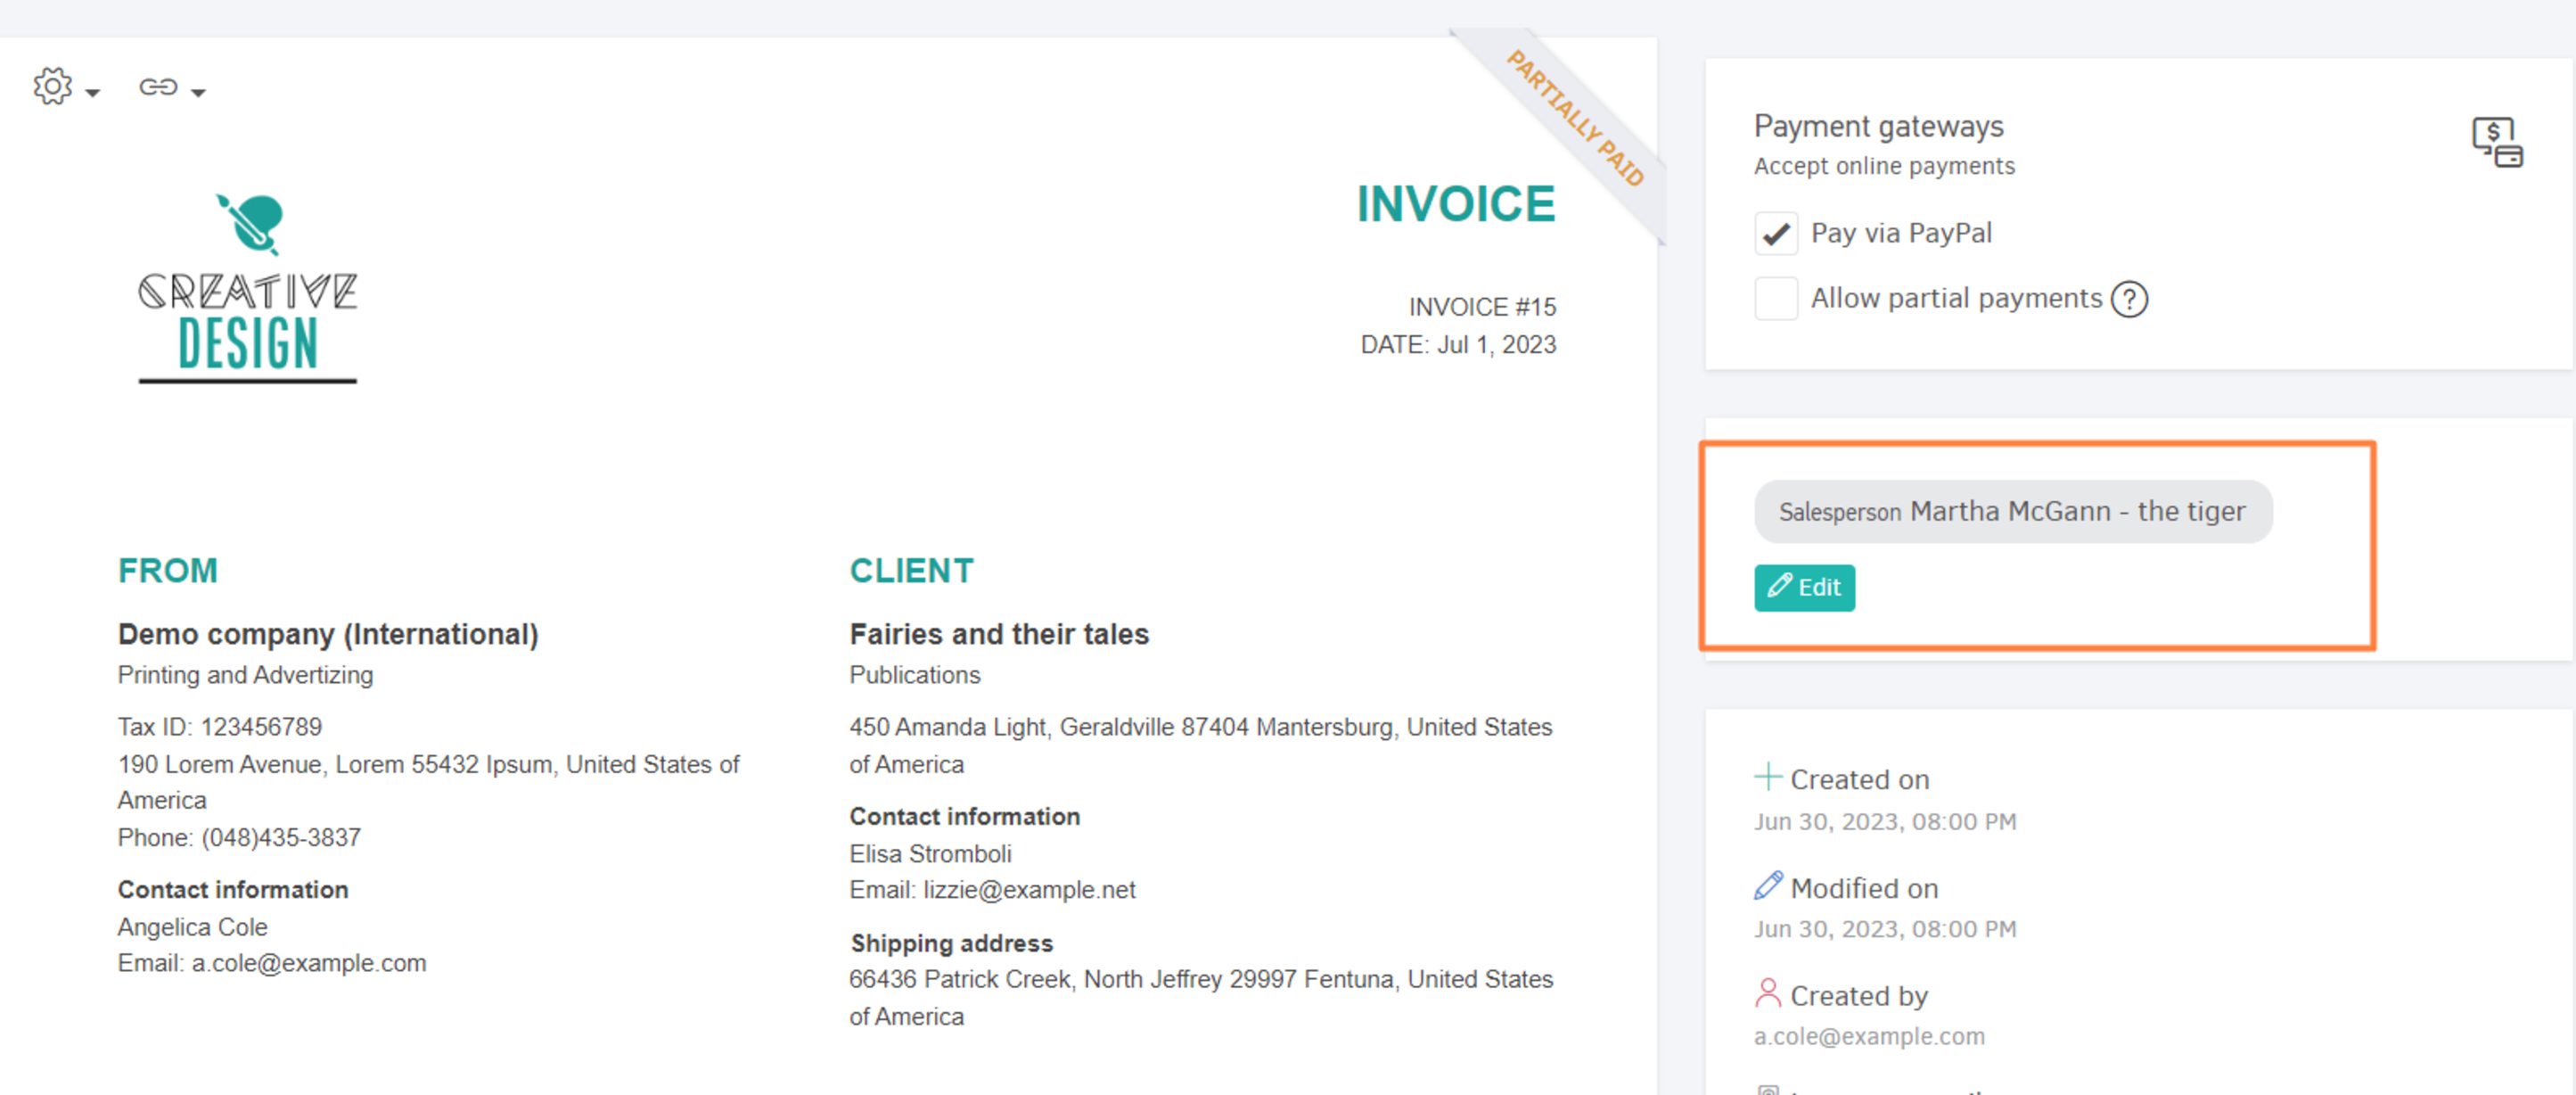 tracking category in the invoice's page 1